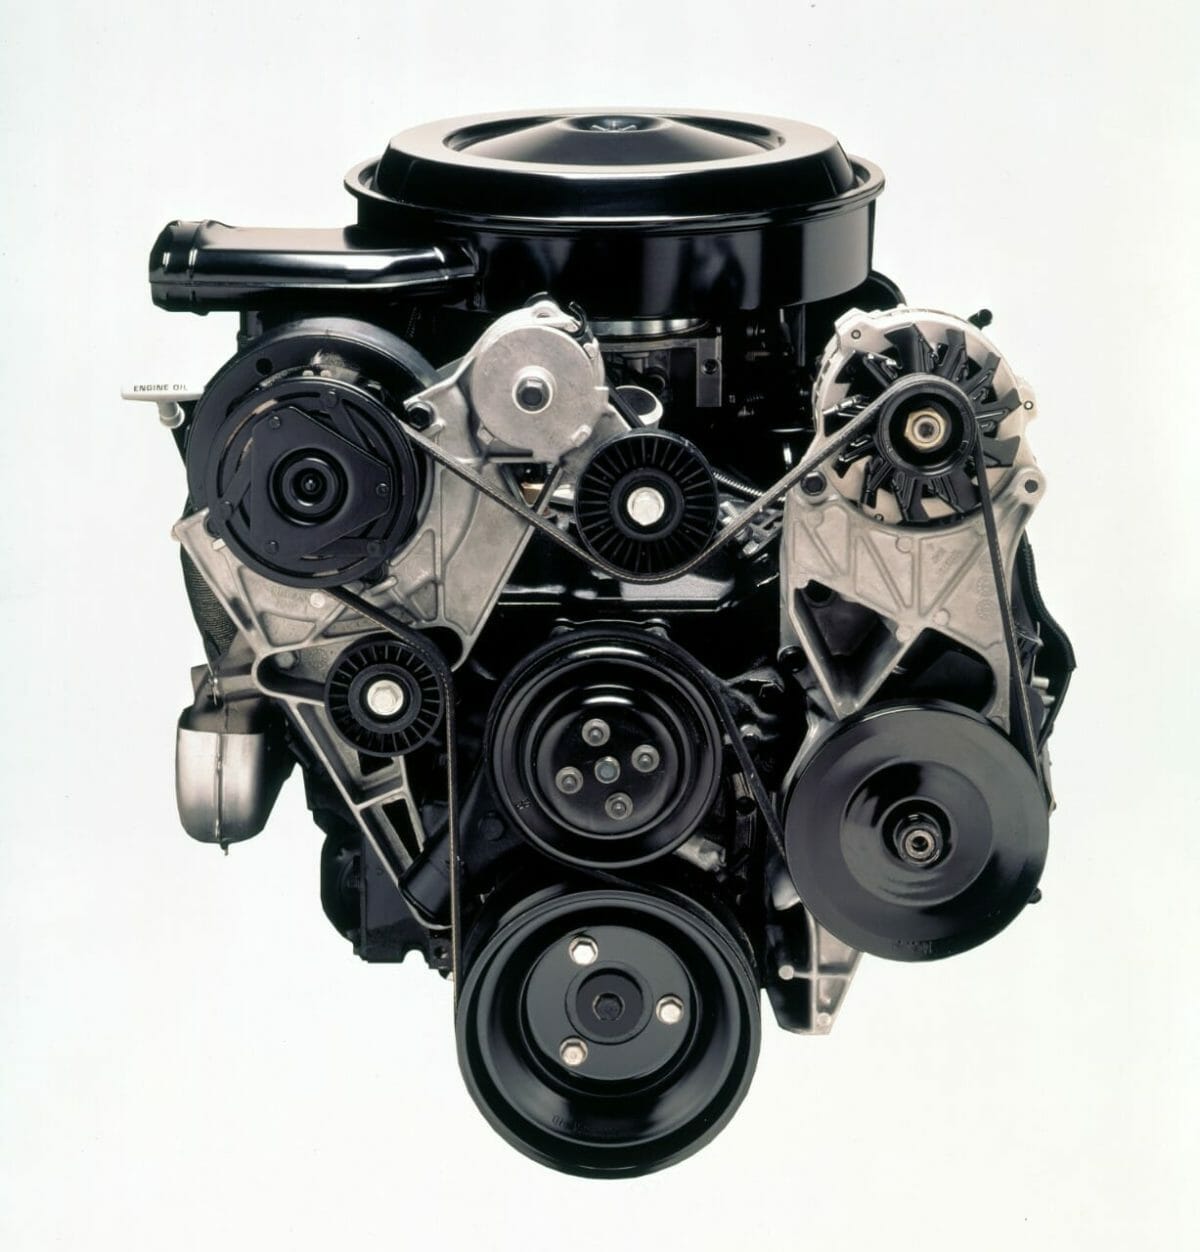 Chevy 305 Engine-Photo by Chevrolet